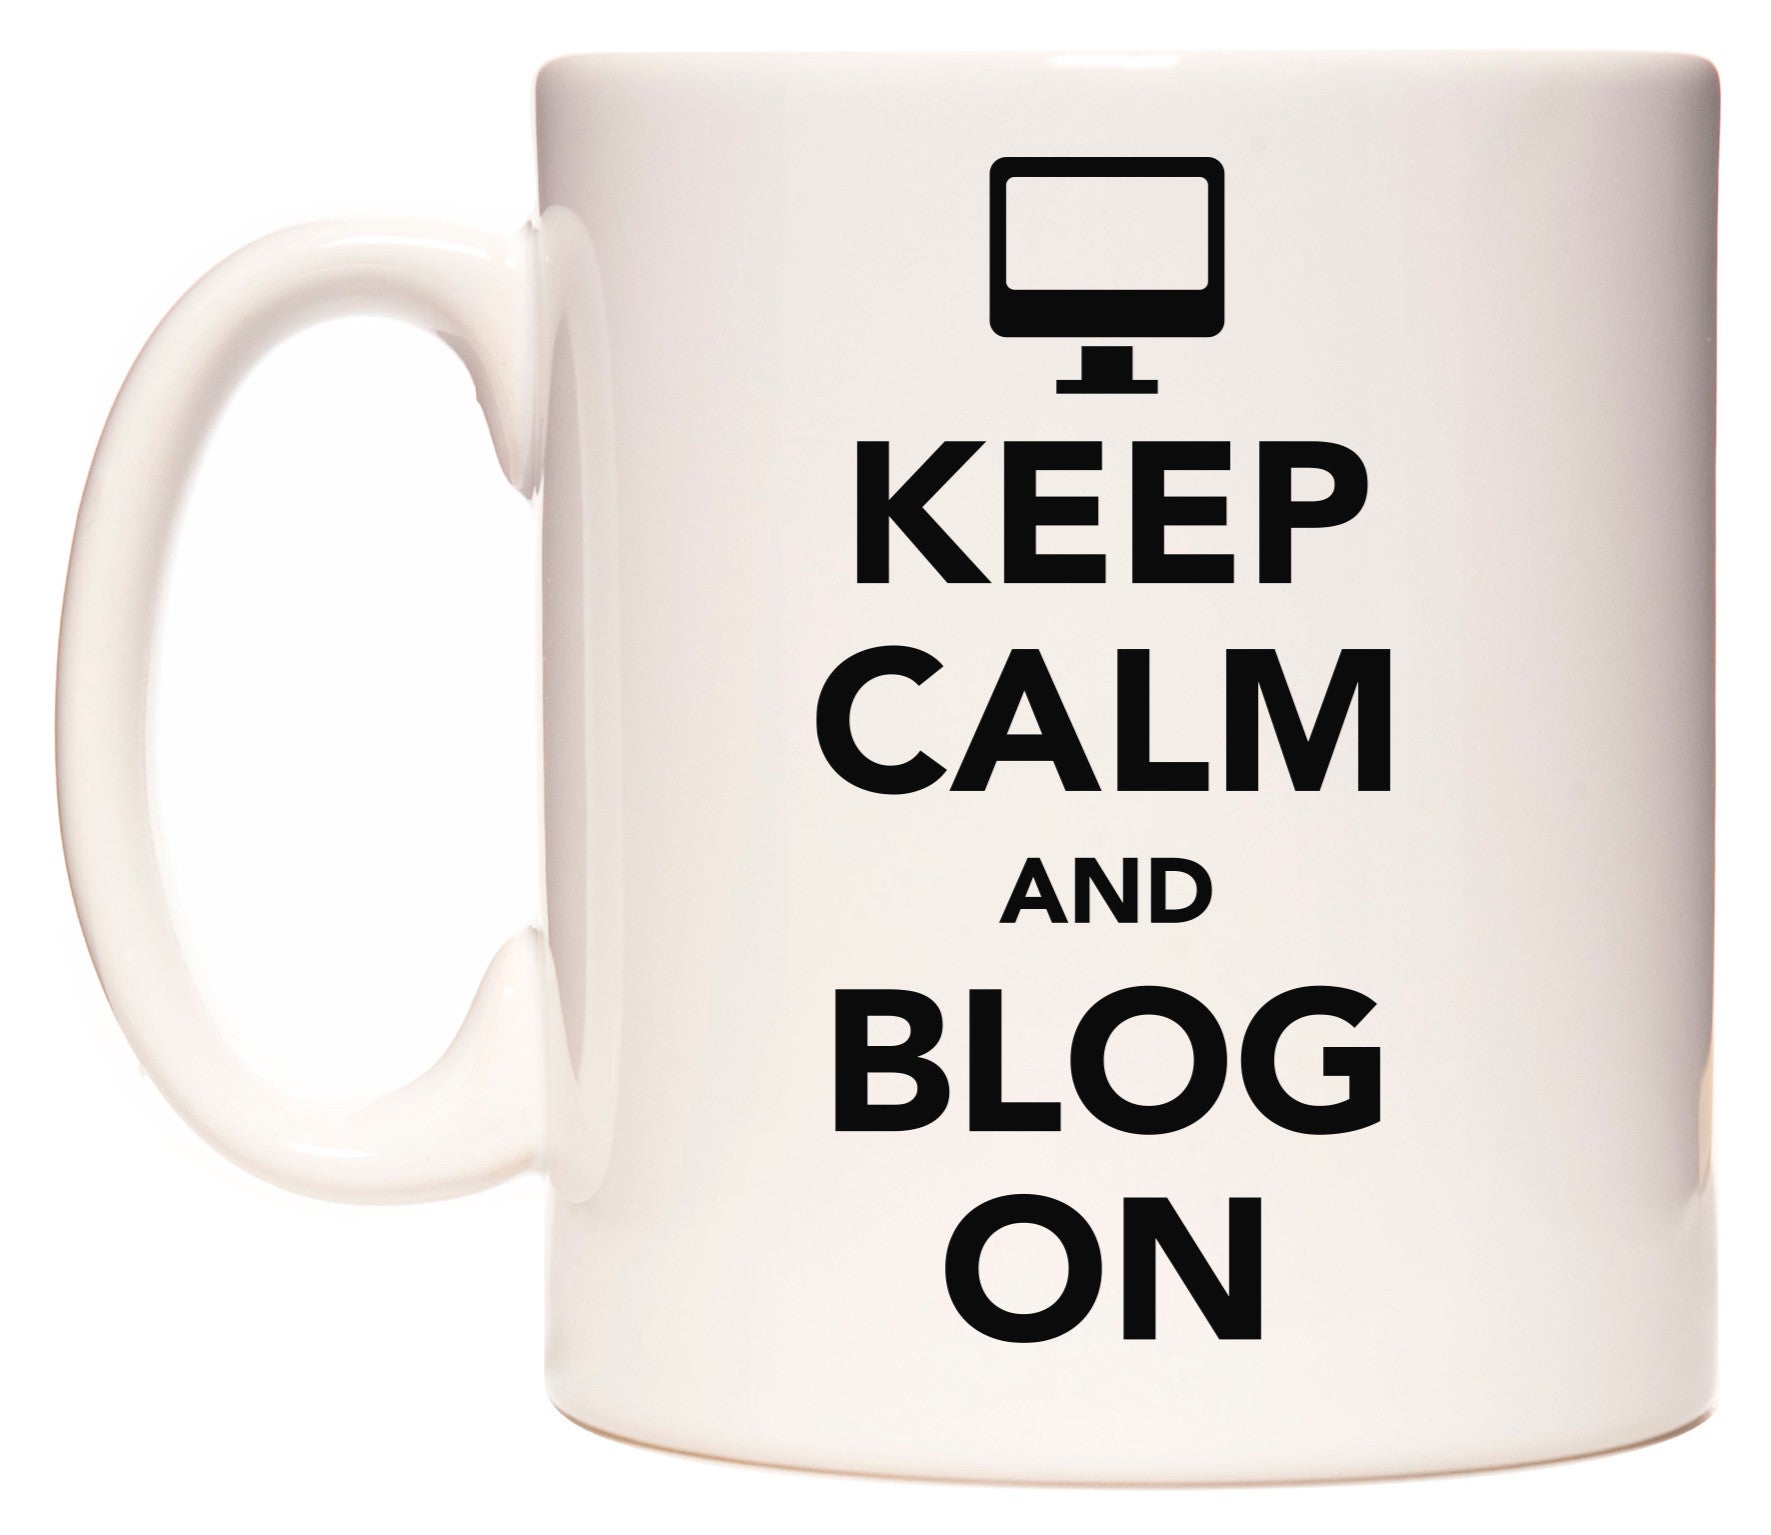 This mug features KEEP CALM AND BLOG ON